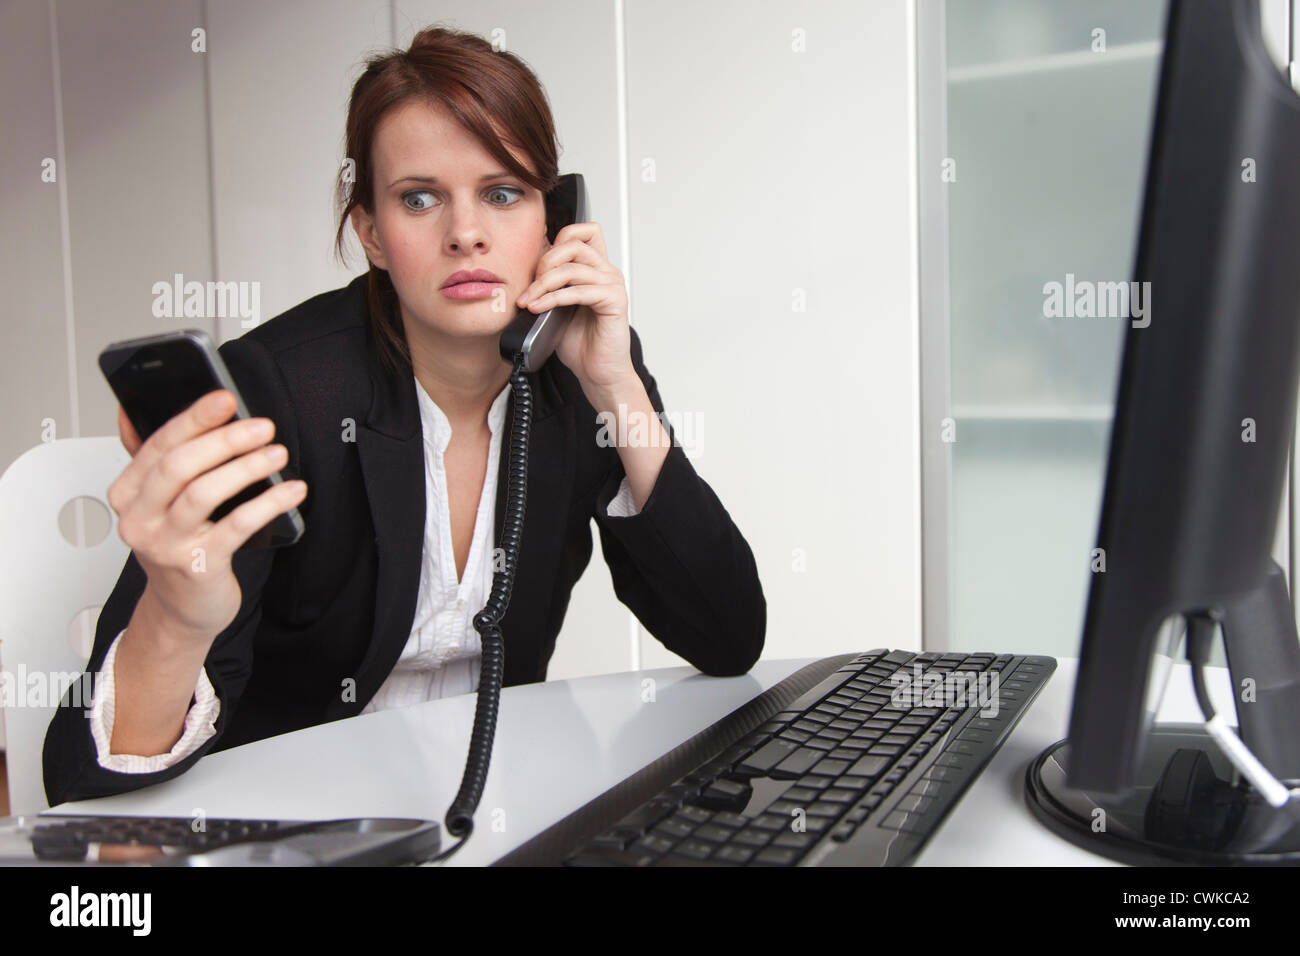 Businesswoman holding cell phone and talking on landline phone Stock Photo